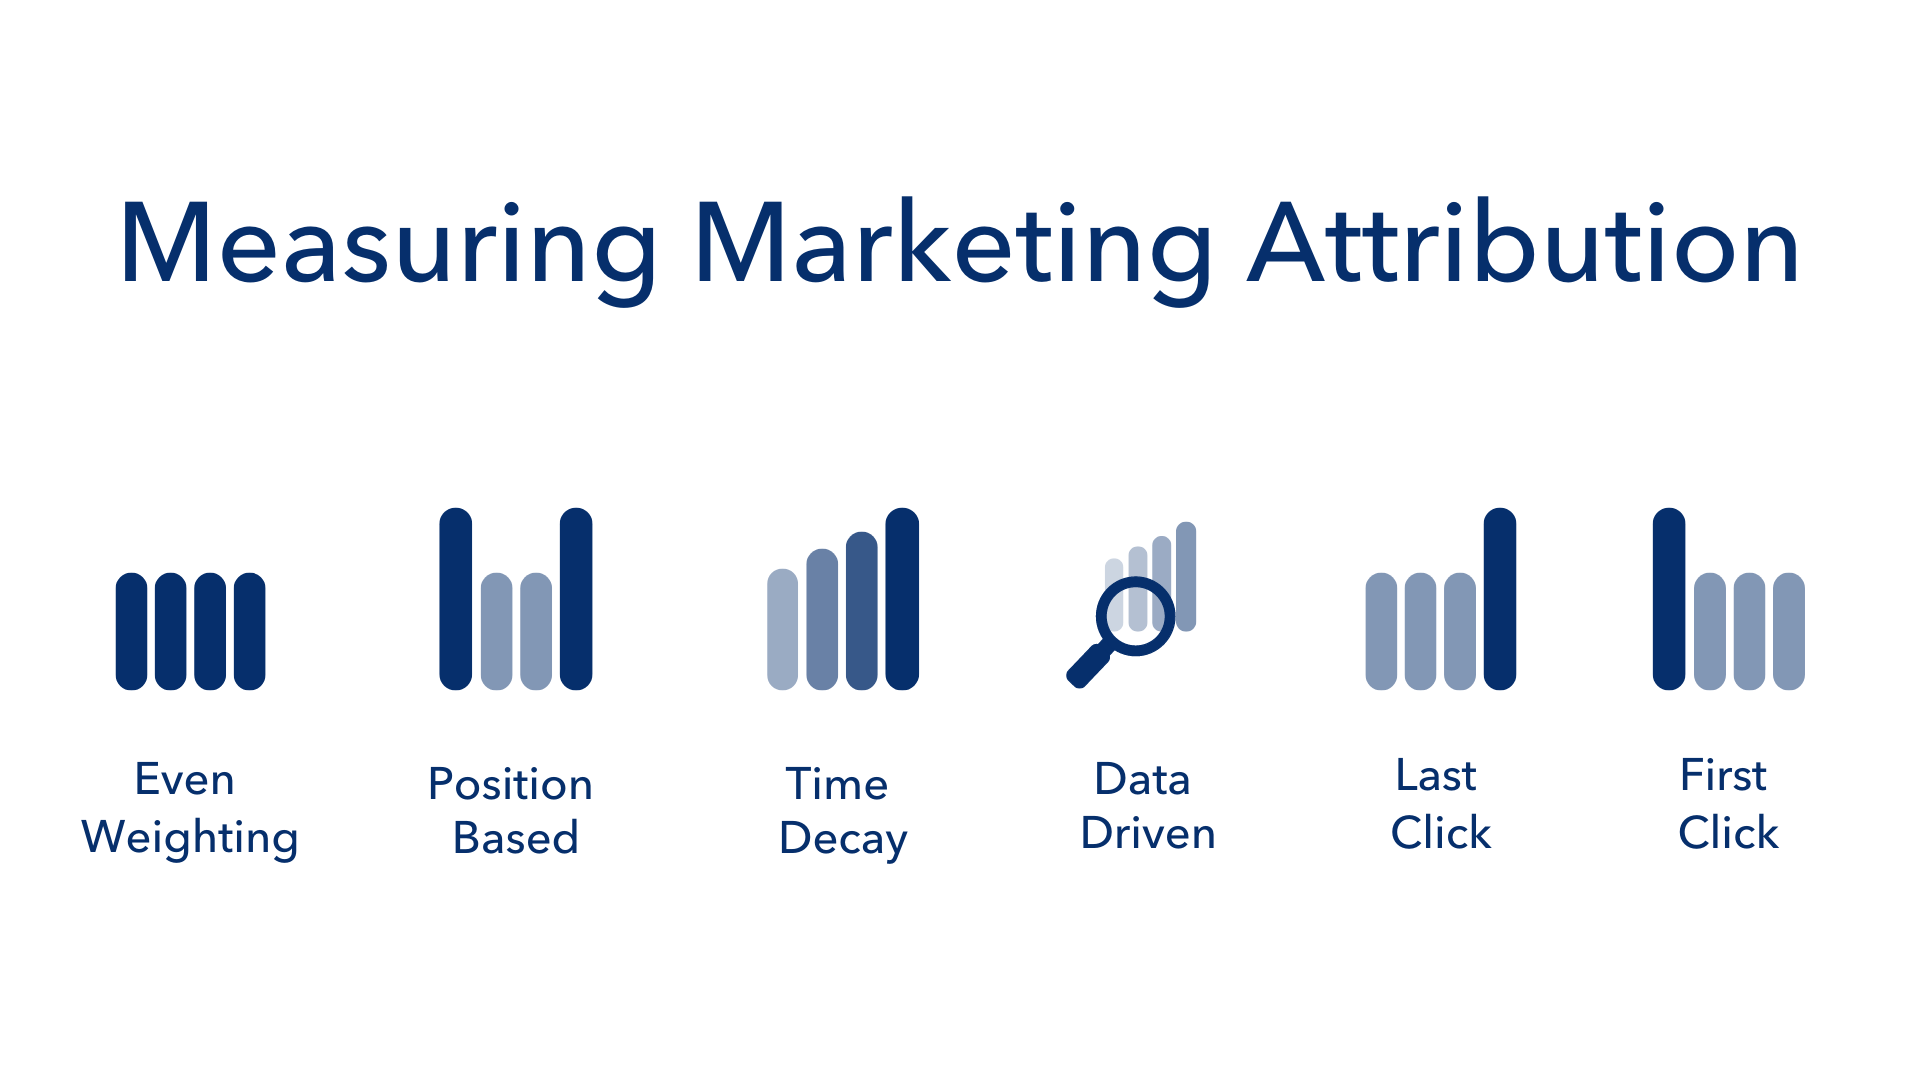 The types of multi-touch attribution and multi-channel attribution are the even weighting, the position based, and time decay, data driven, last click, and first click attribution